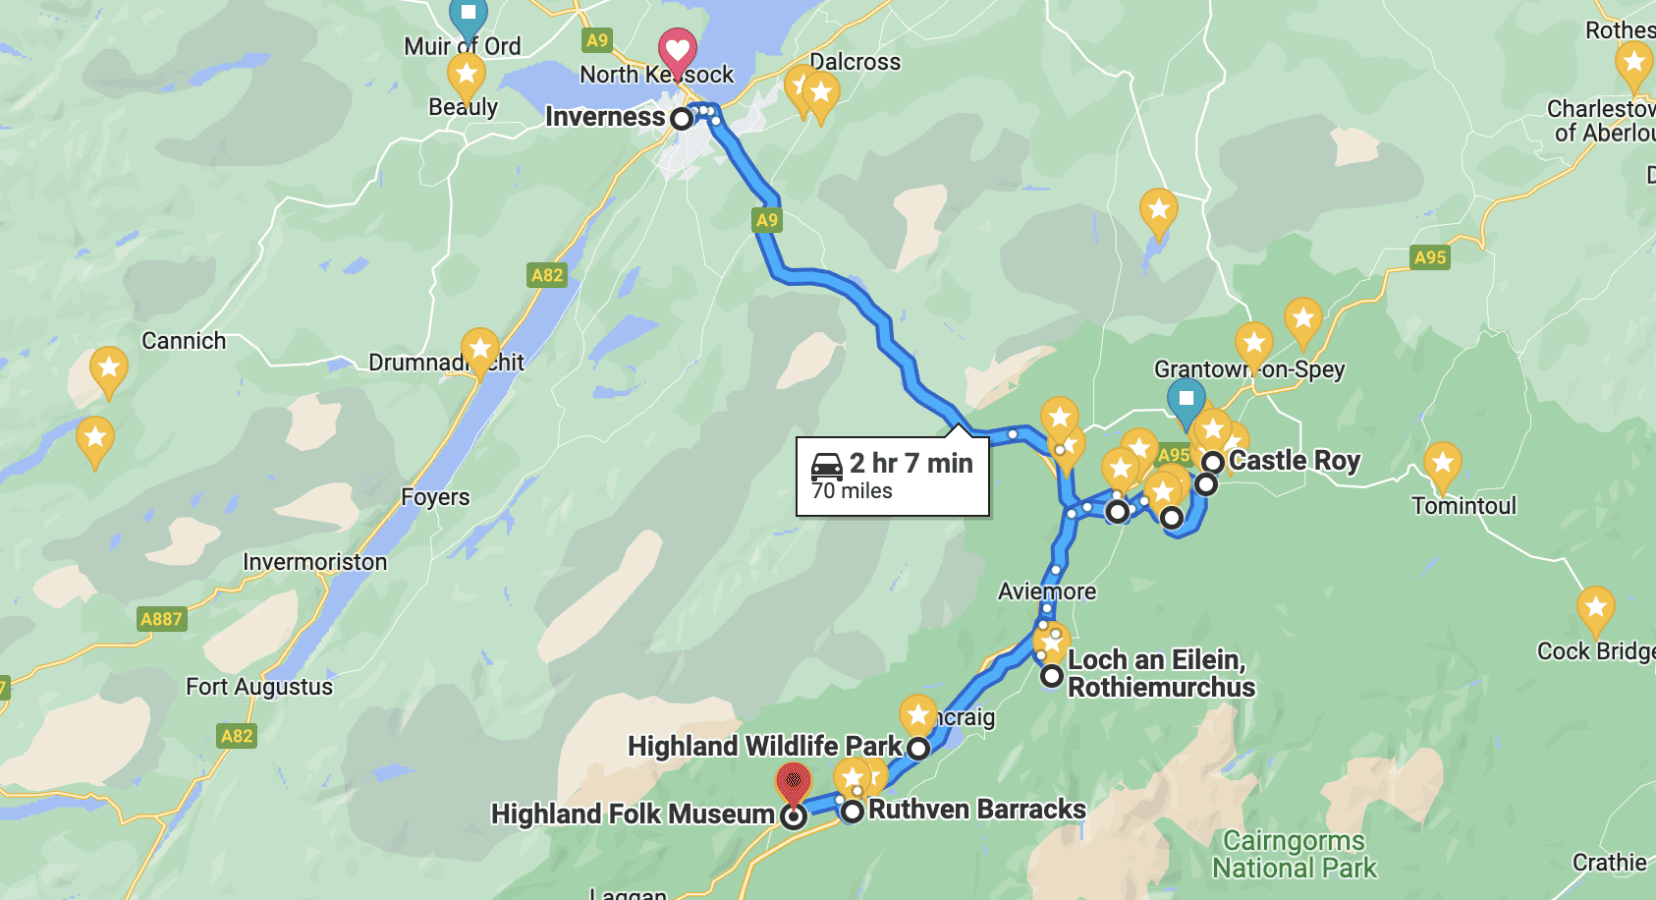 Inverness road trip route 4 image from Google maps